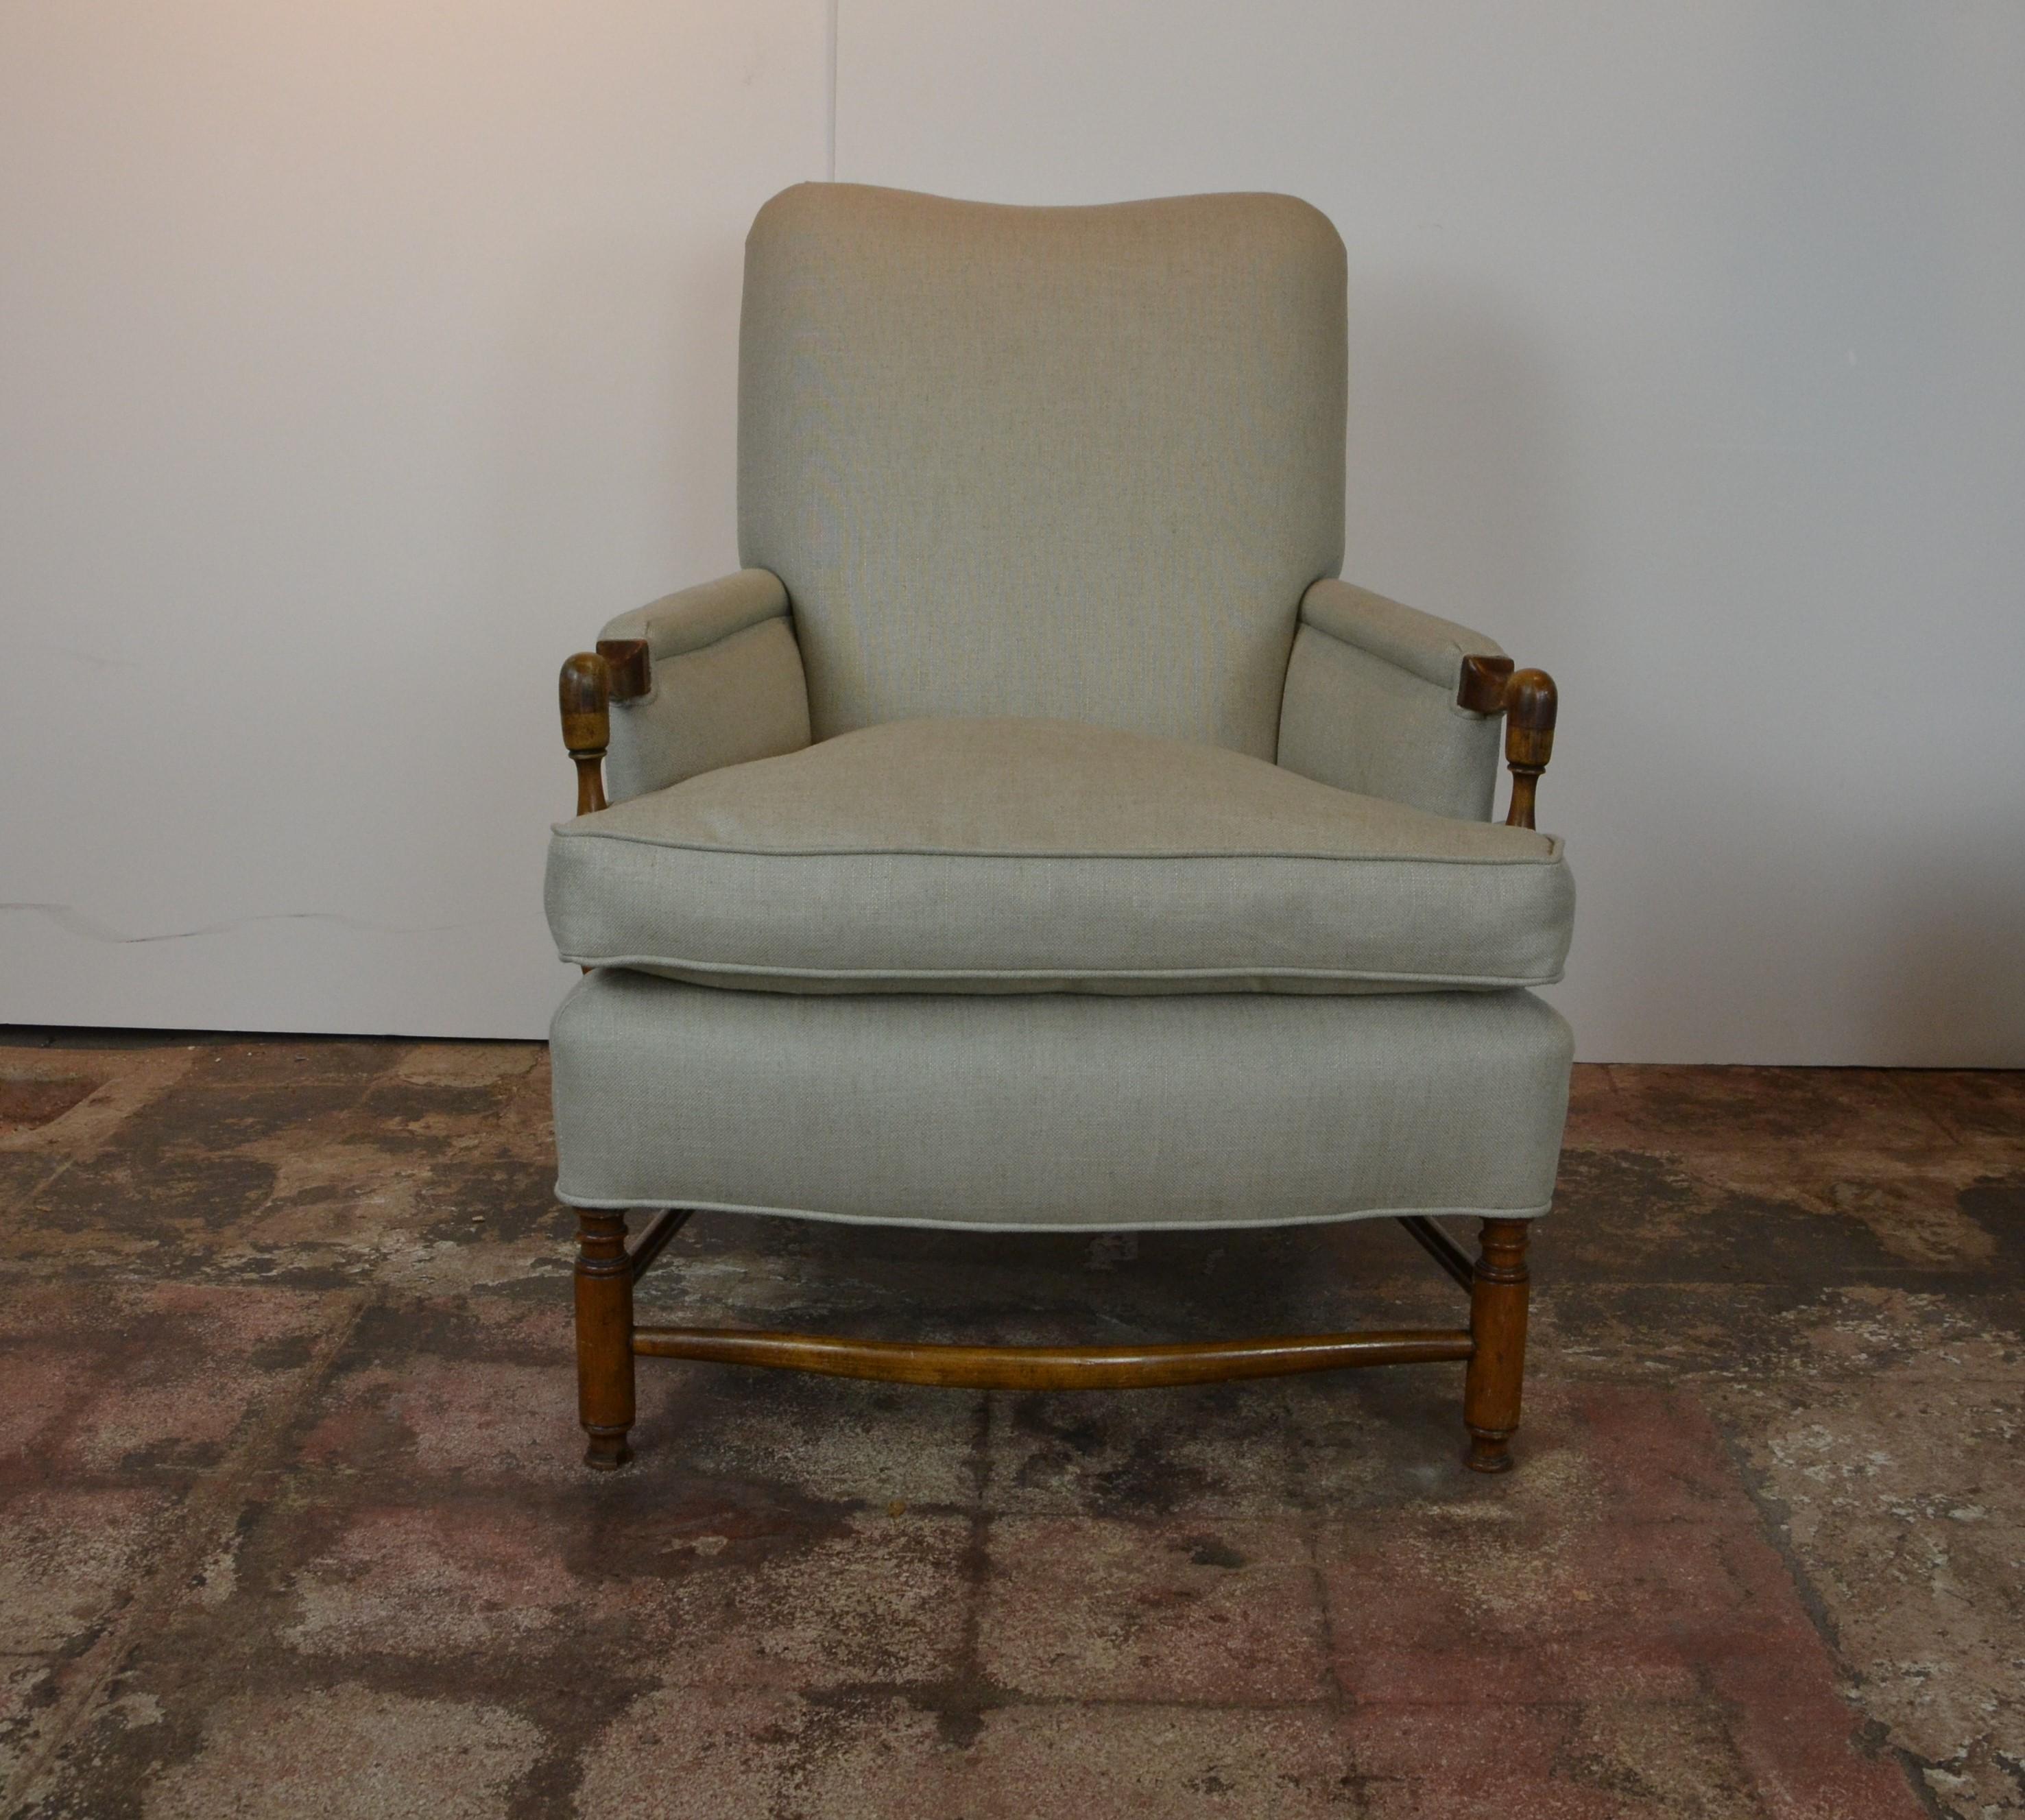 French chair with matching ottoman. Newly upholstered in linen. Measures: Ottoman 25